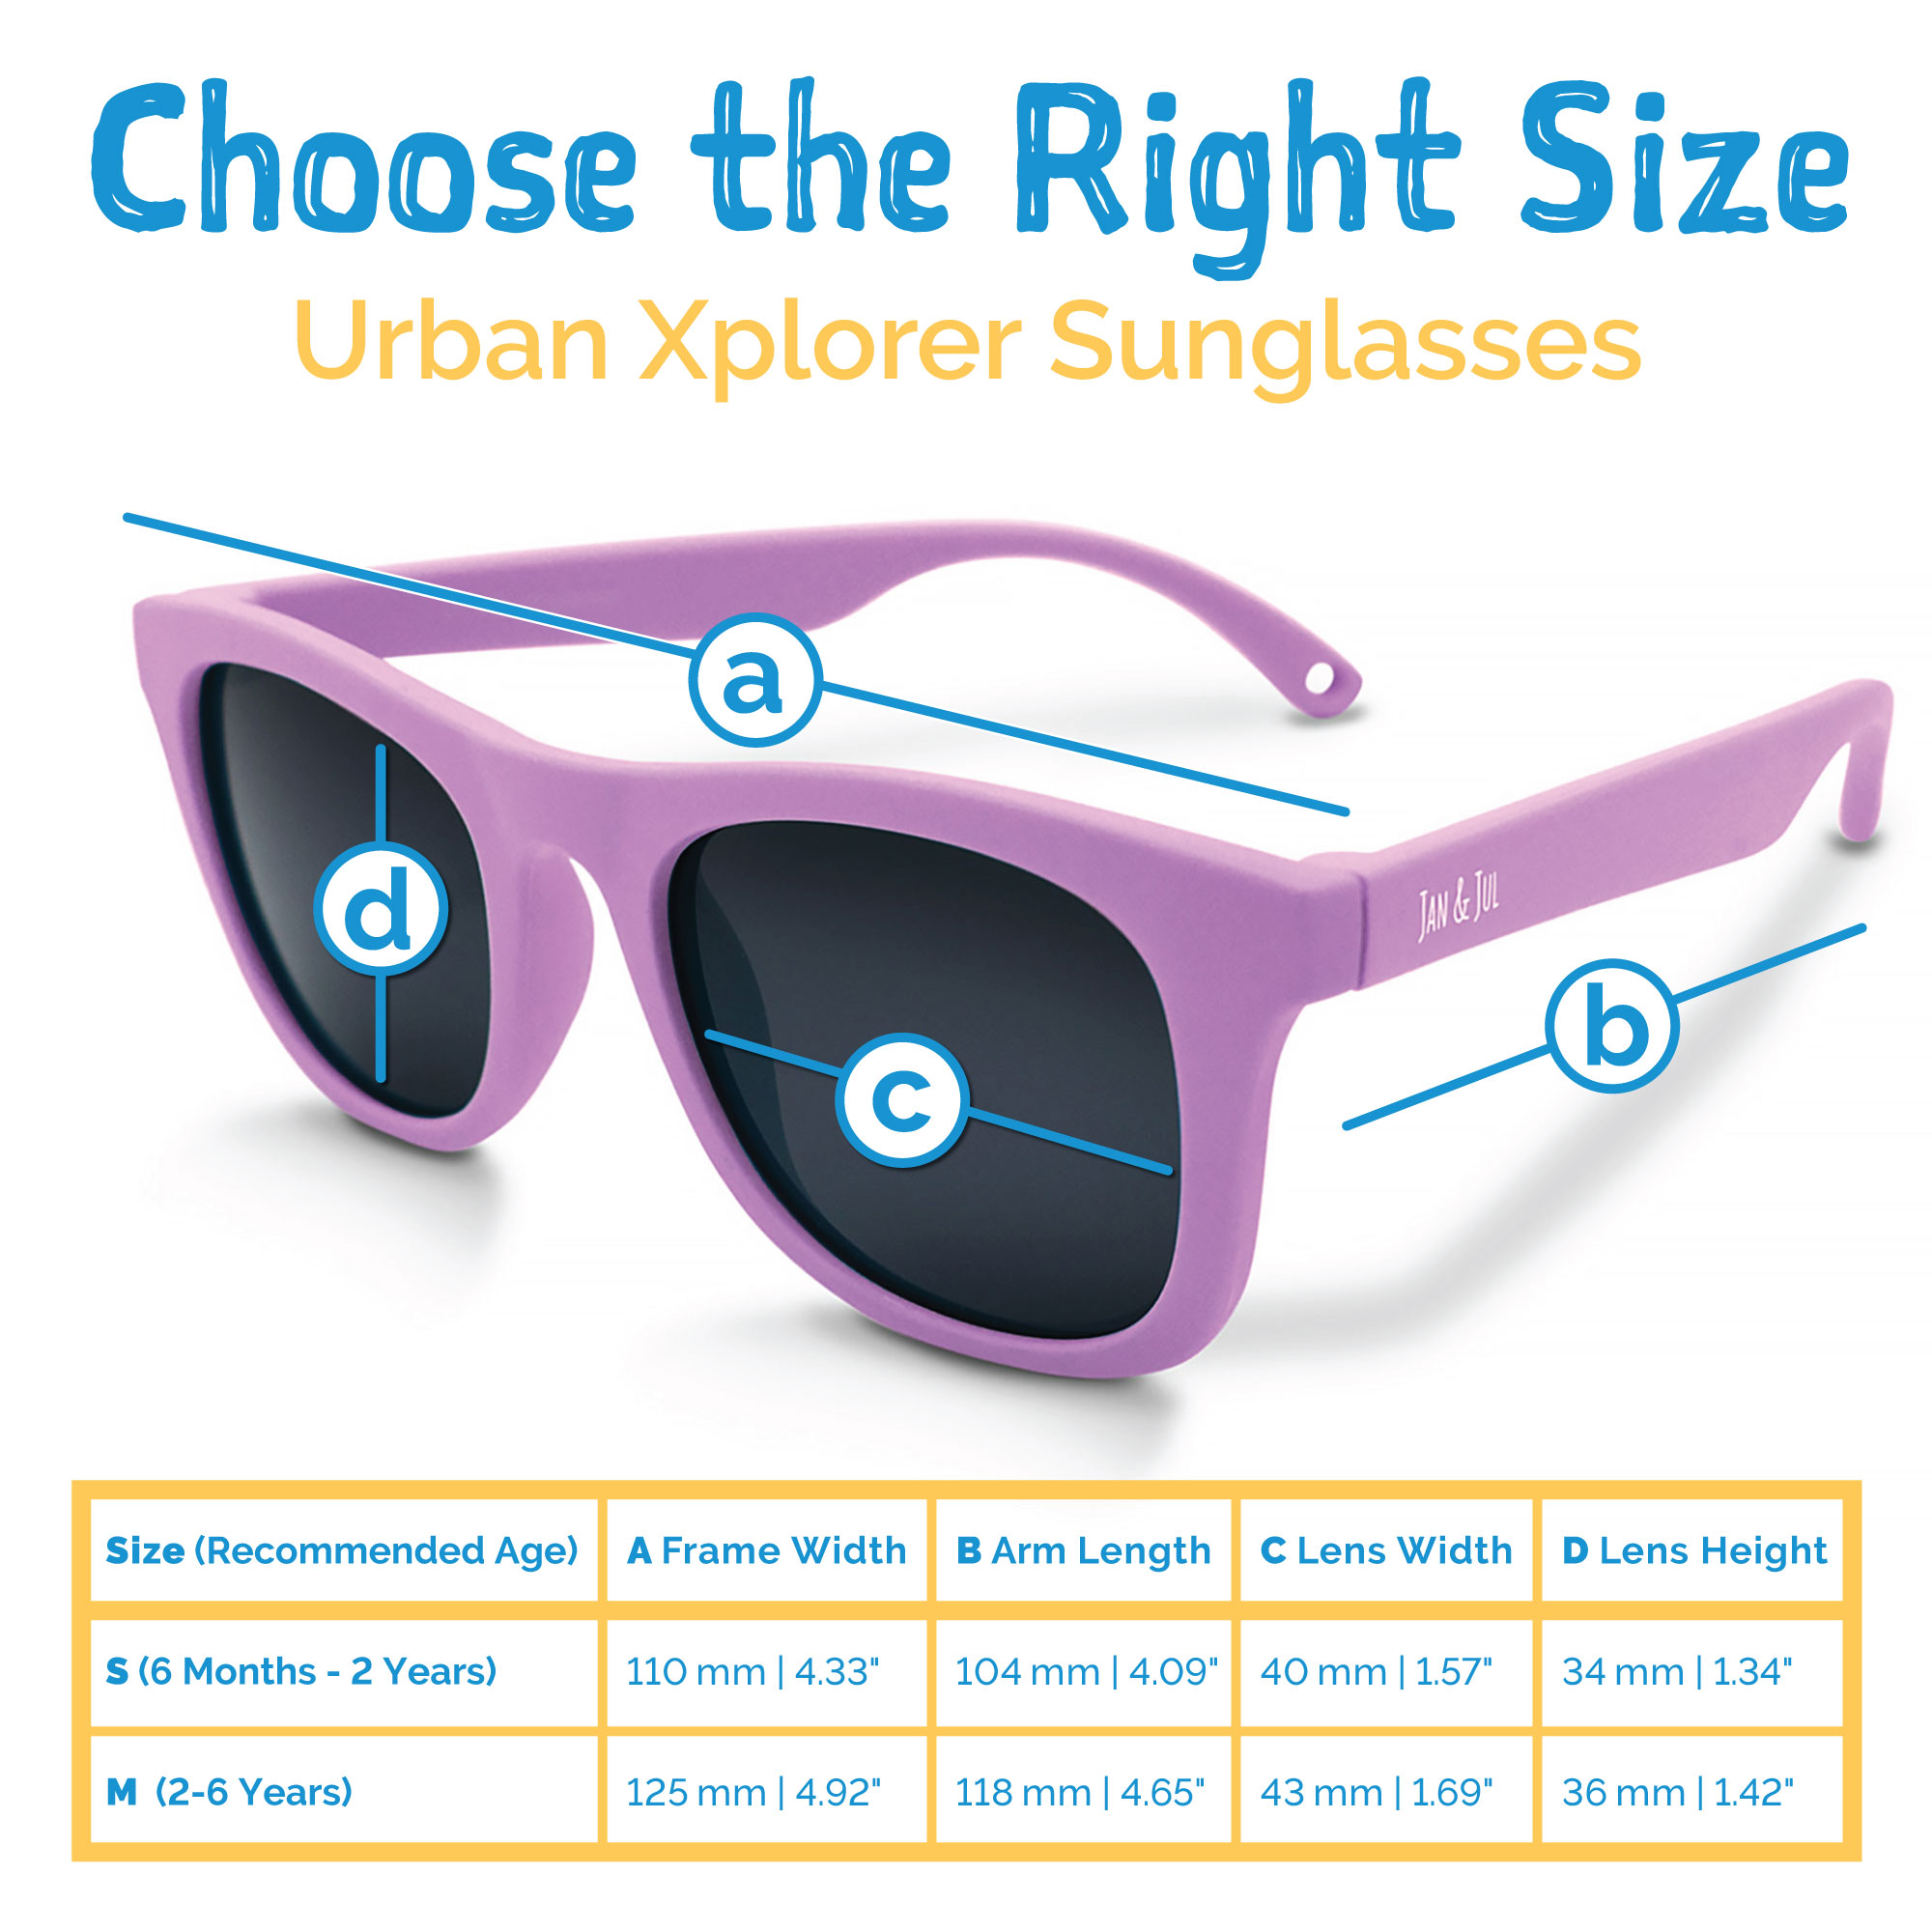 Jan & Jul Baby Sunglasses with Strap for Girls, Polarized, Non-Toxic (S: 6 Months -2 Years, Purple) - image 5 of 7